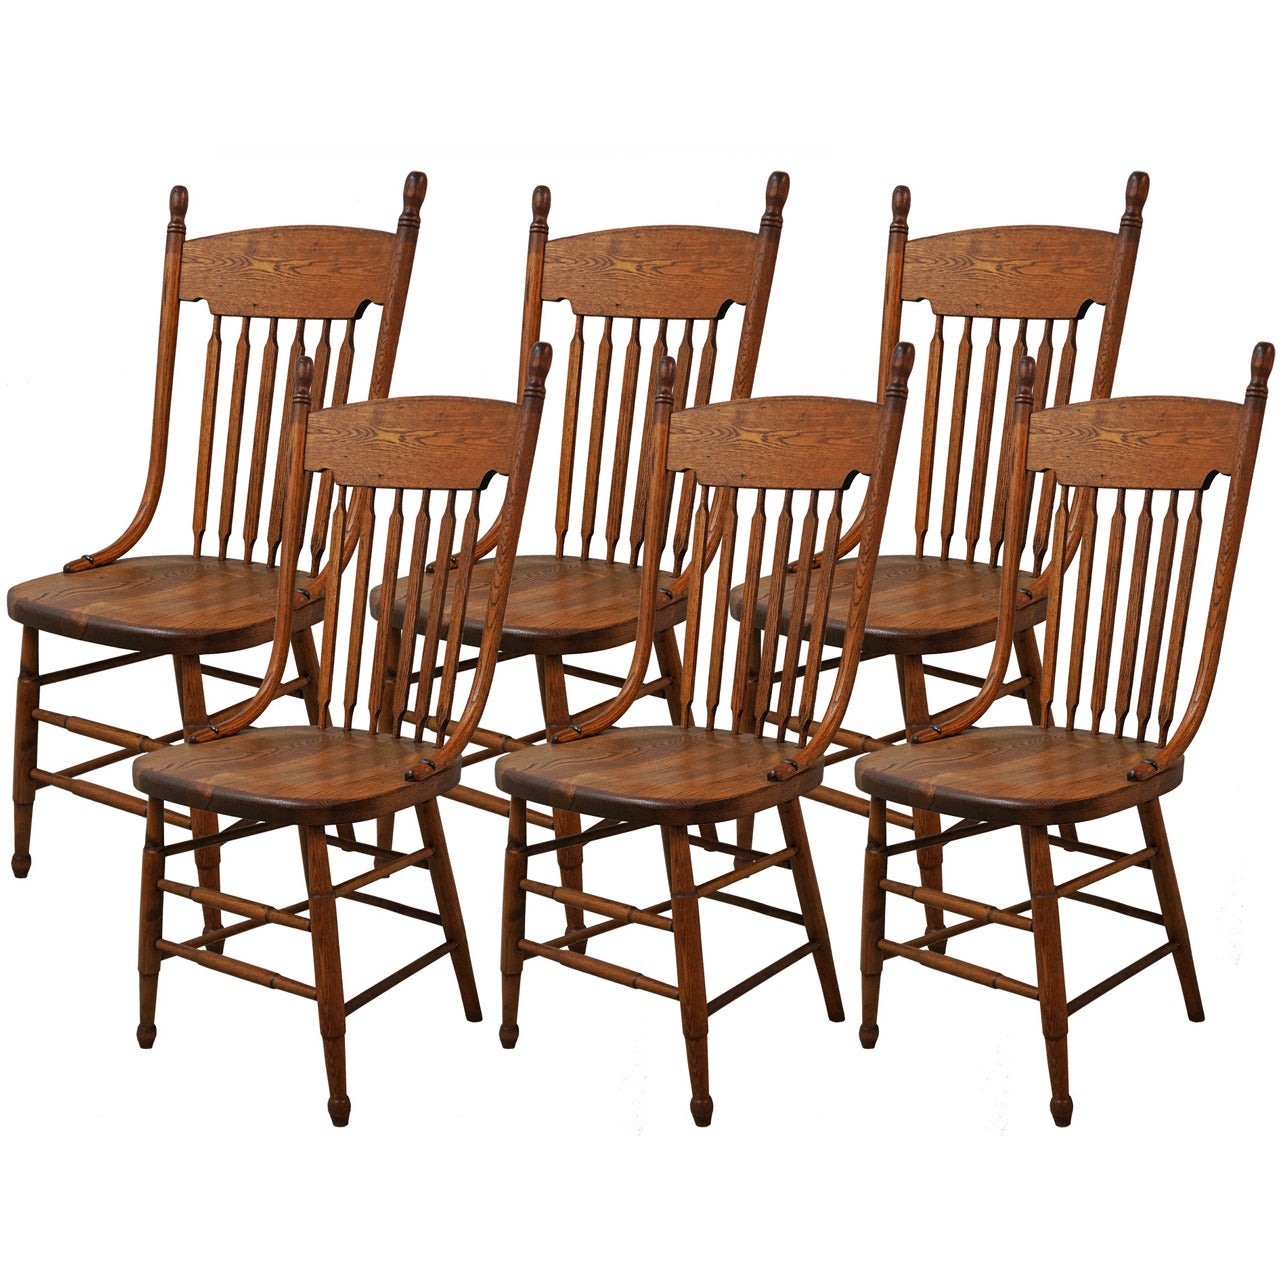 Set of Six Shaker-Style Spindle Back Chairs